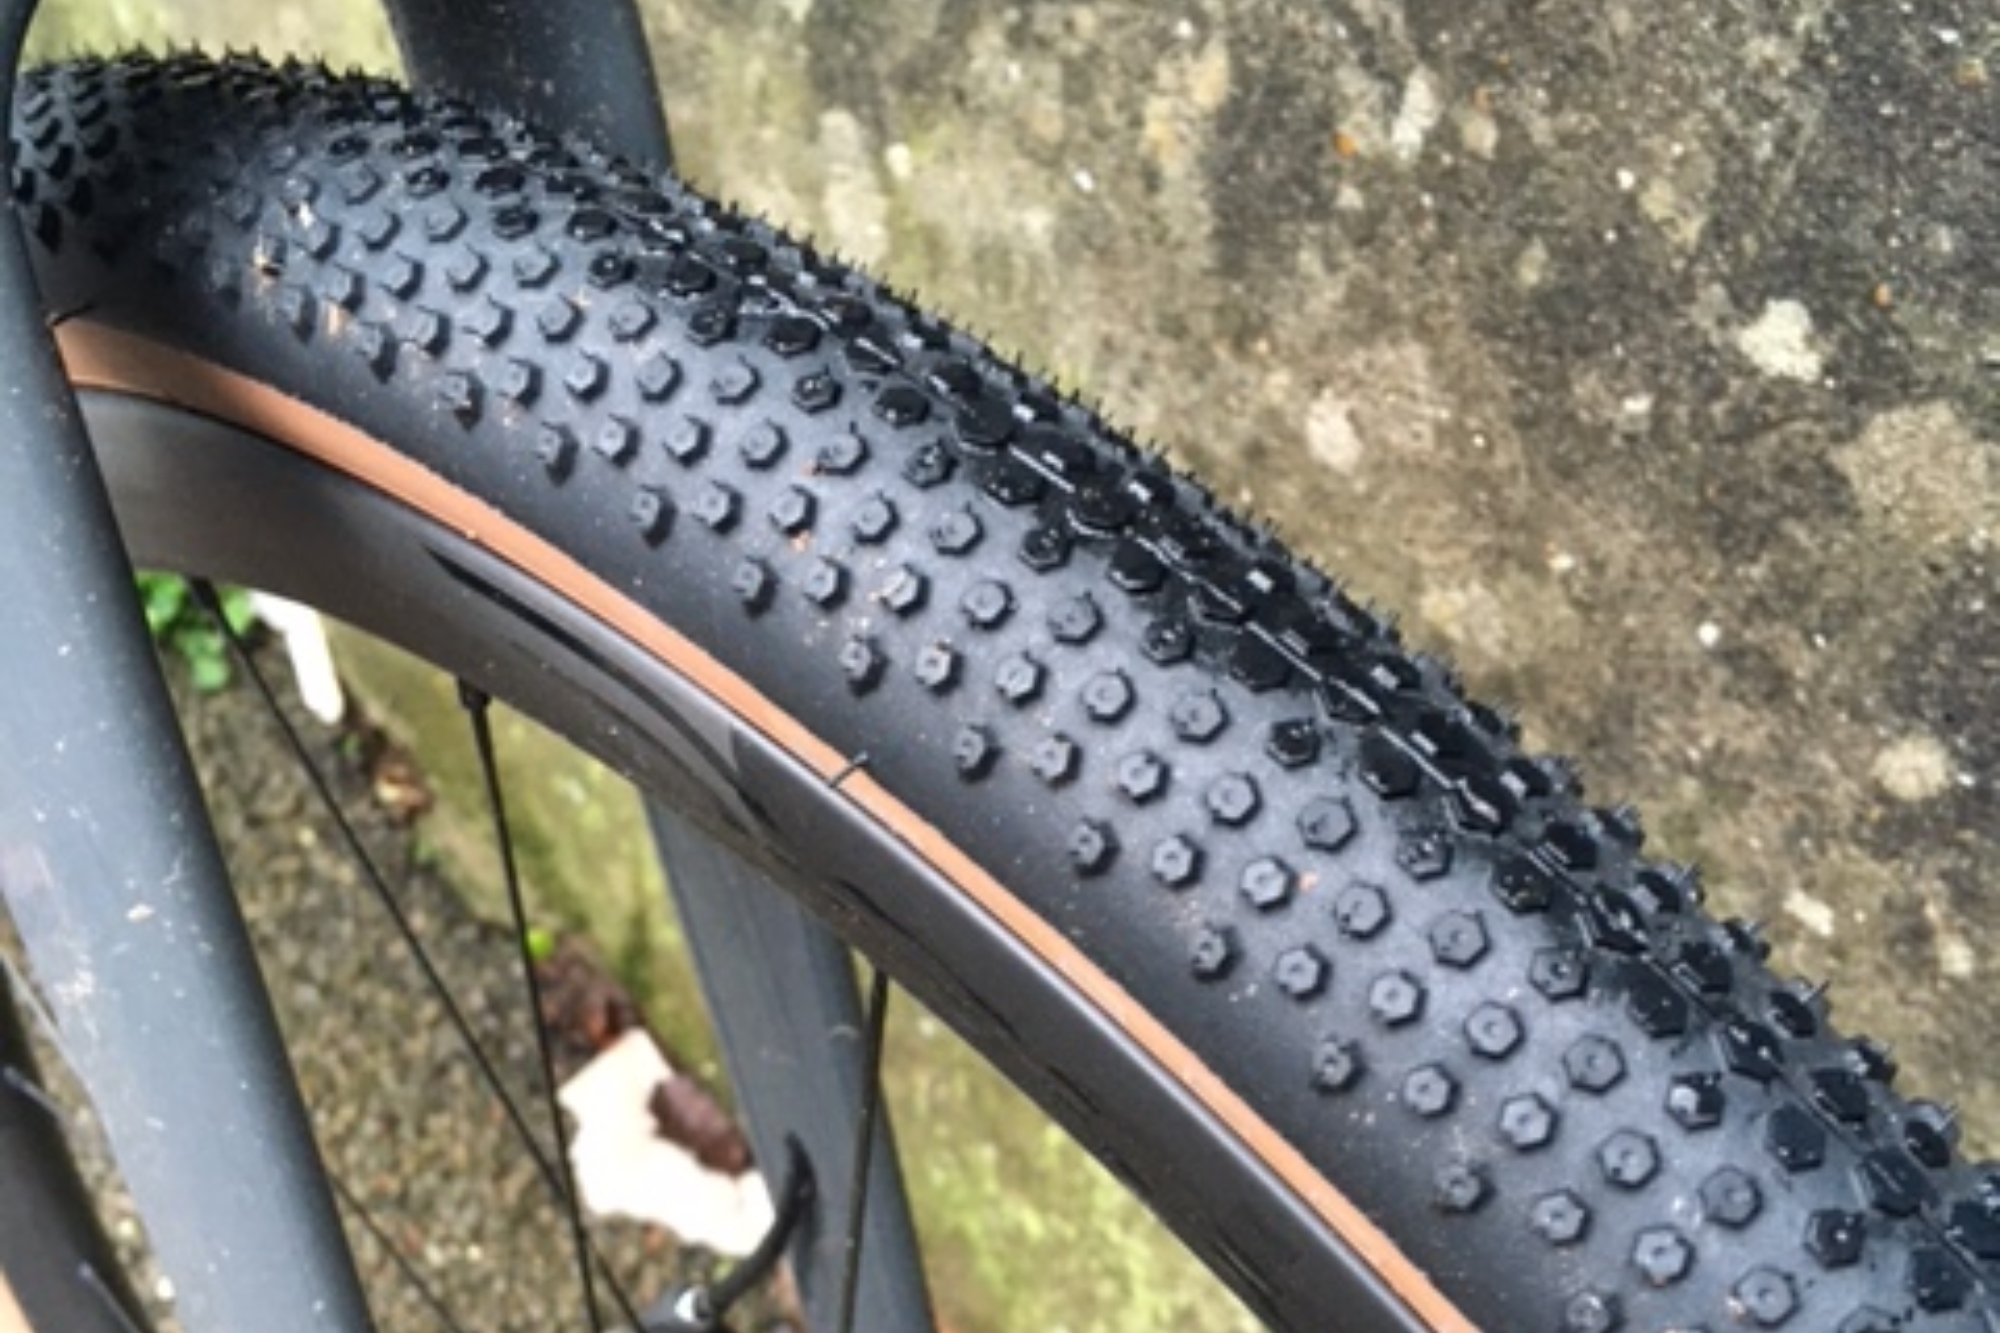 Image shows tread pattern of the American Classics Aggregate gravel tire